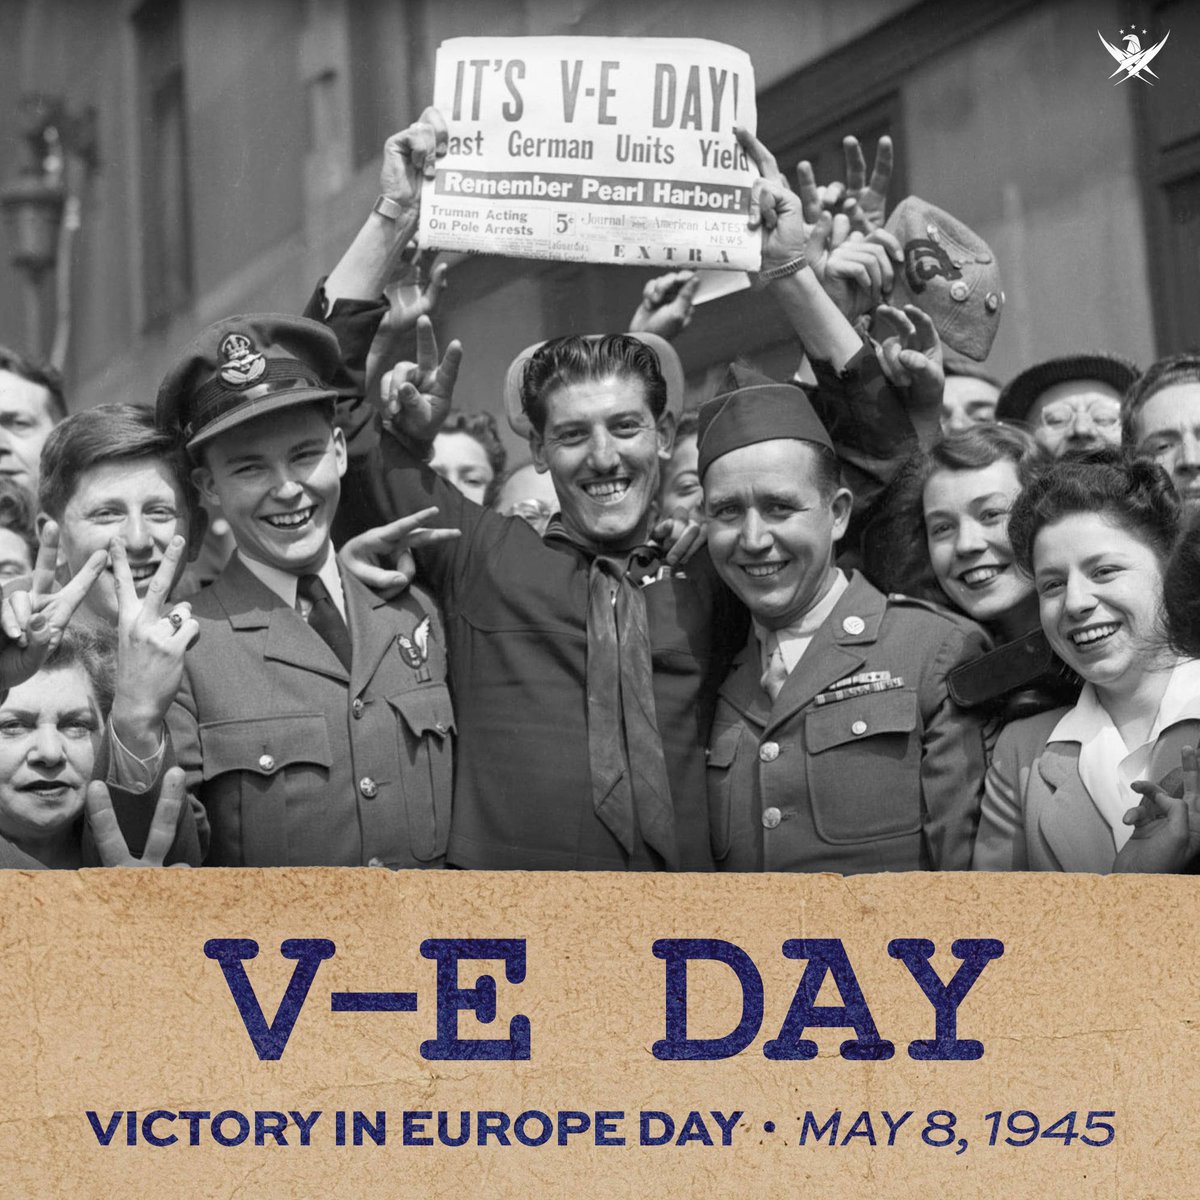 May 8th, 1945 is known as Victory in Europe Day (V-E Day) after Germany unconditionally surrendered its military forces to the Allies, marking the end of World War II in Europe. Learn more about our Soaring Valor program at @WWIImuseum in New Orleans. bit.ly/2UGwd0